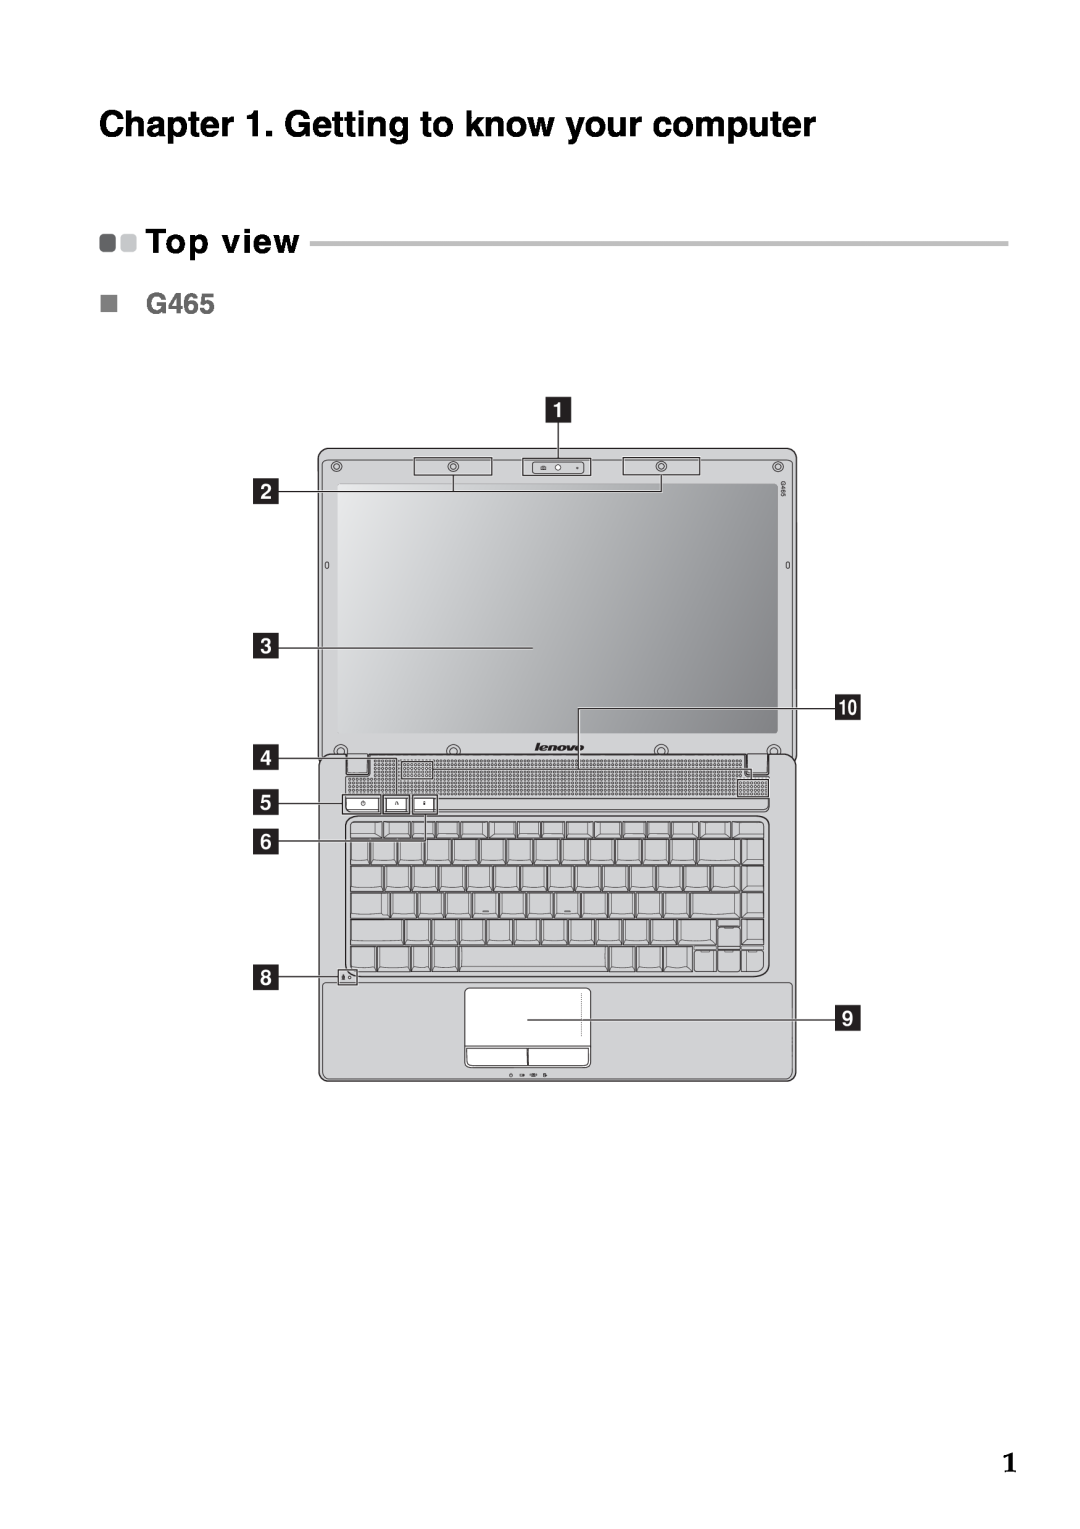 Lenovo G565 manual Getting to know your computer, „ G465, Top view, a b c d e f h 